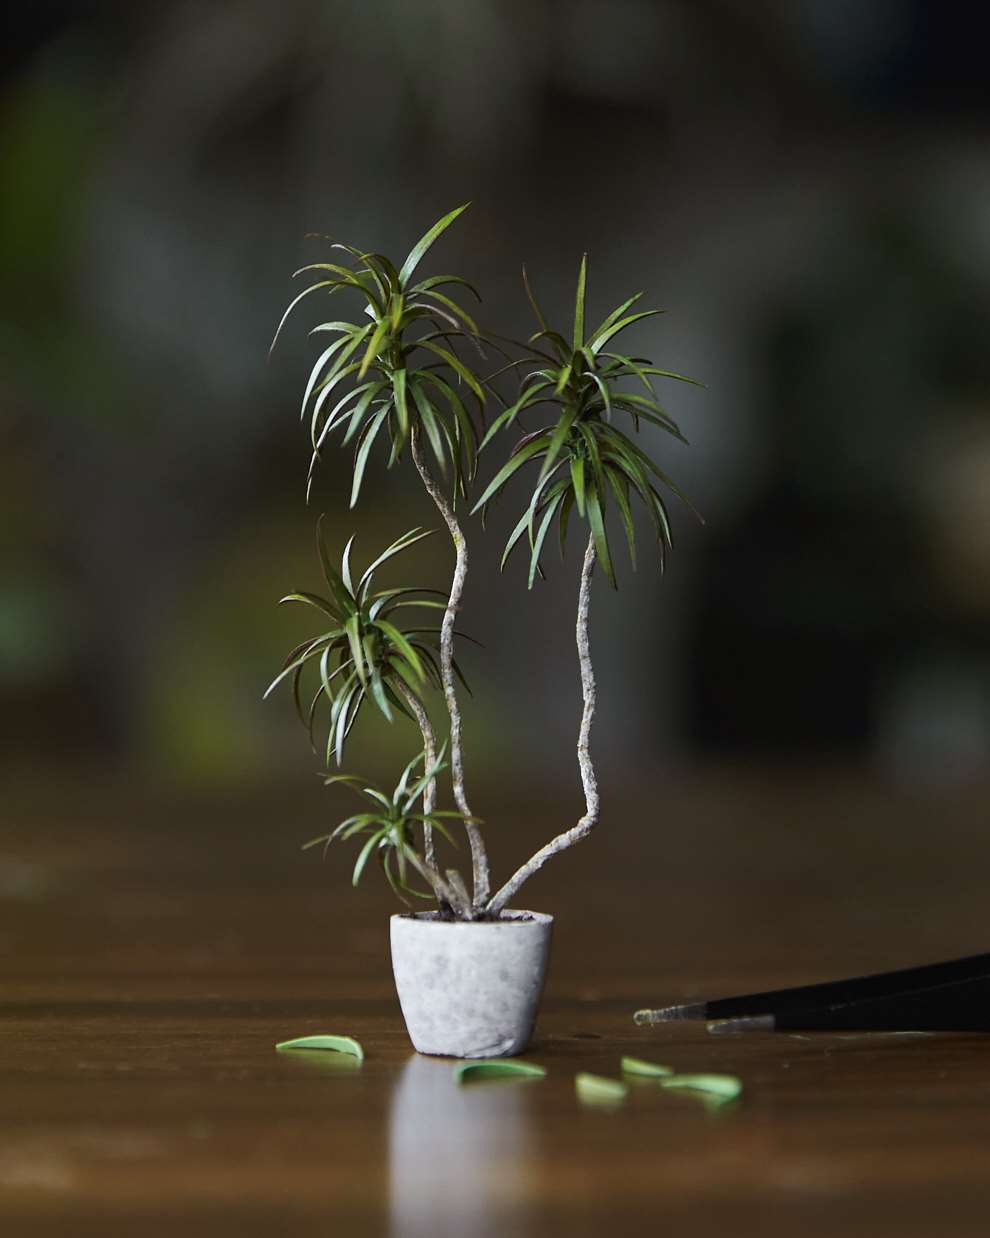 Hannah Lemon, Miniature detailed house plant. Tiny sculpture made from air drying clay, paper, wood, paint, mixed media. 